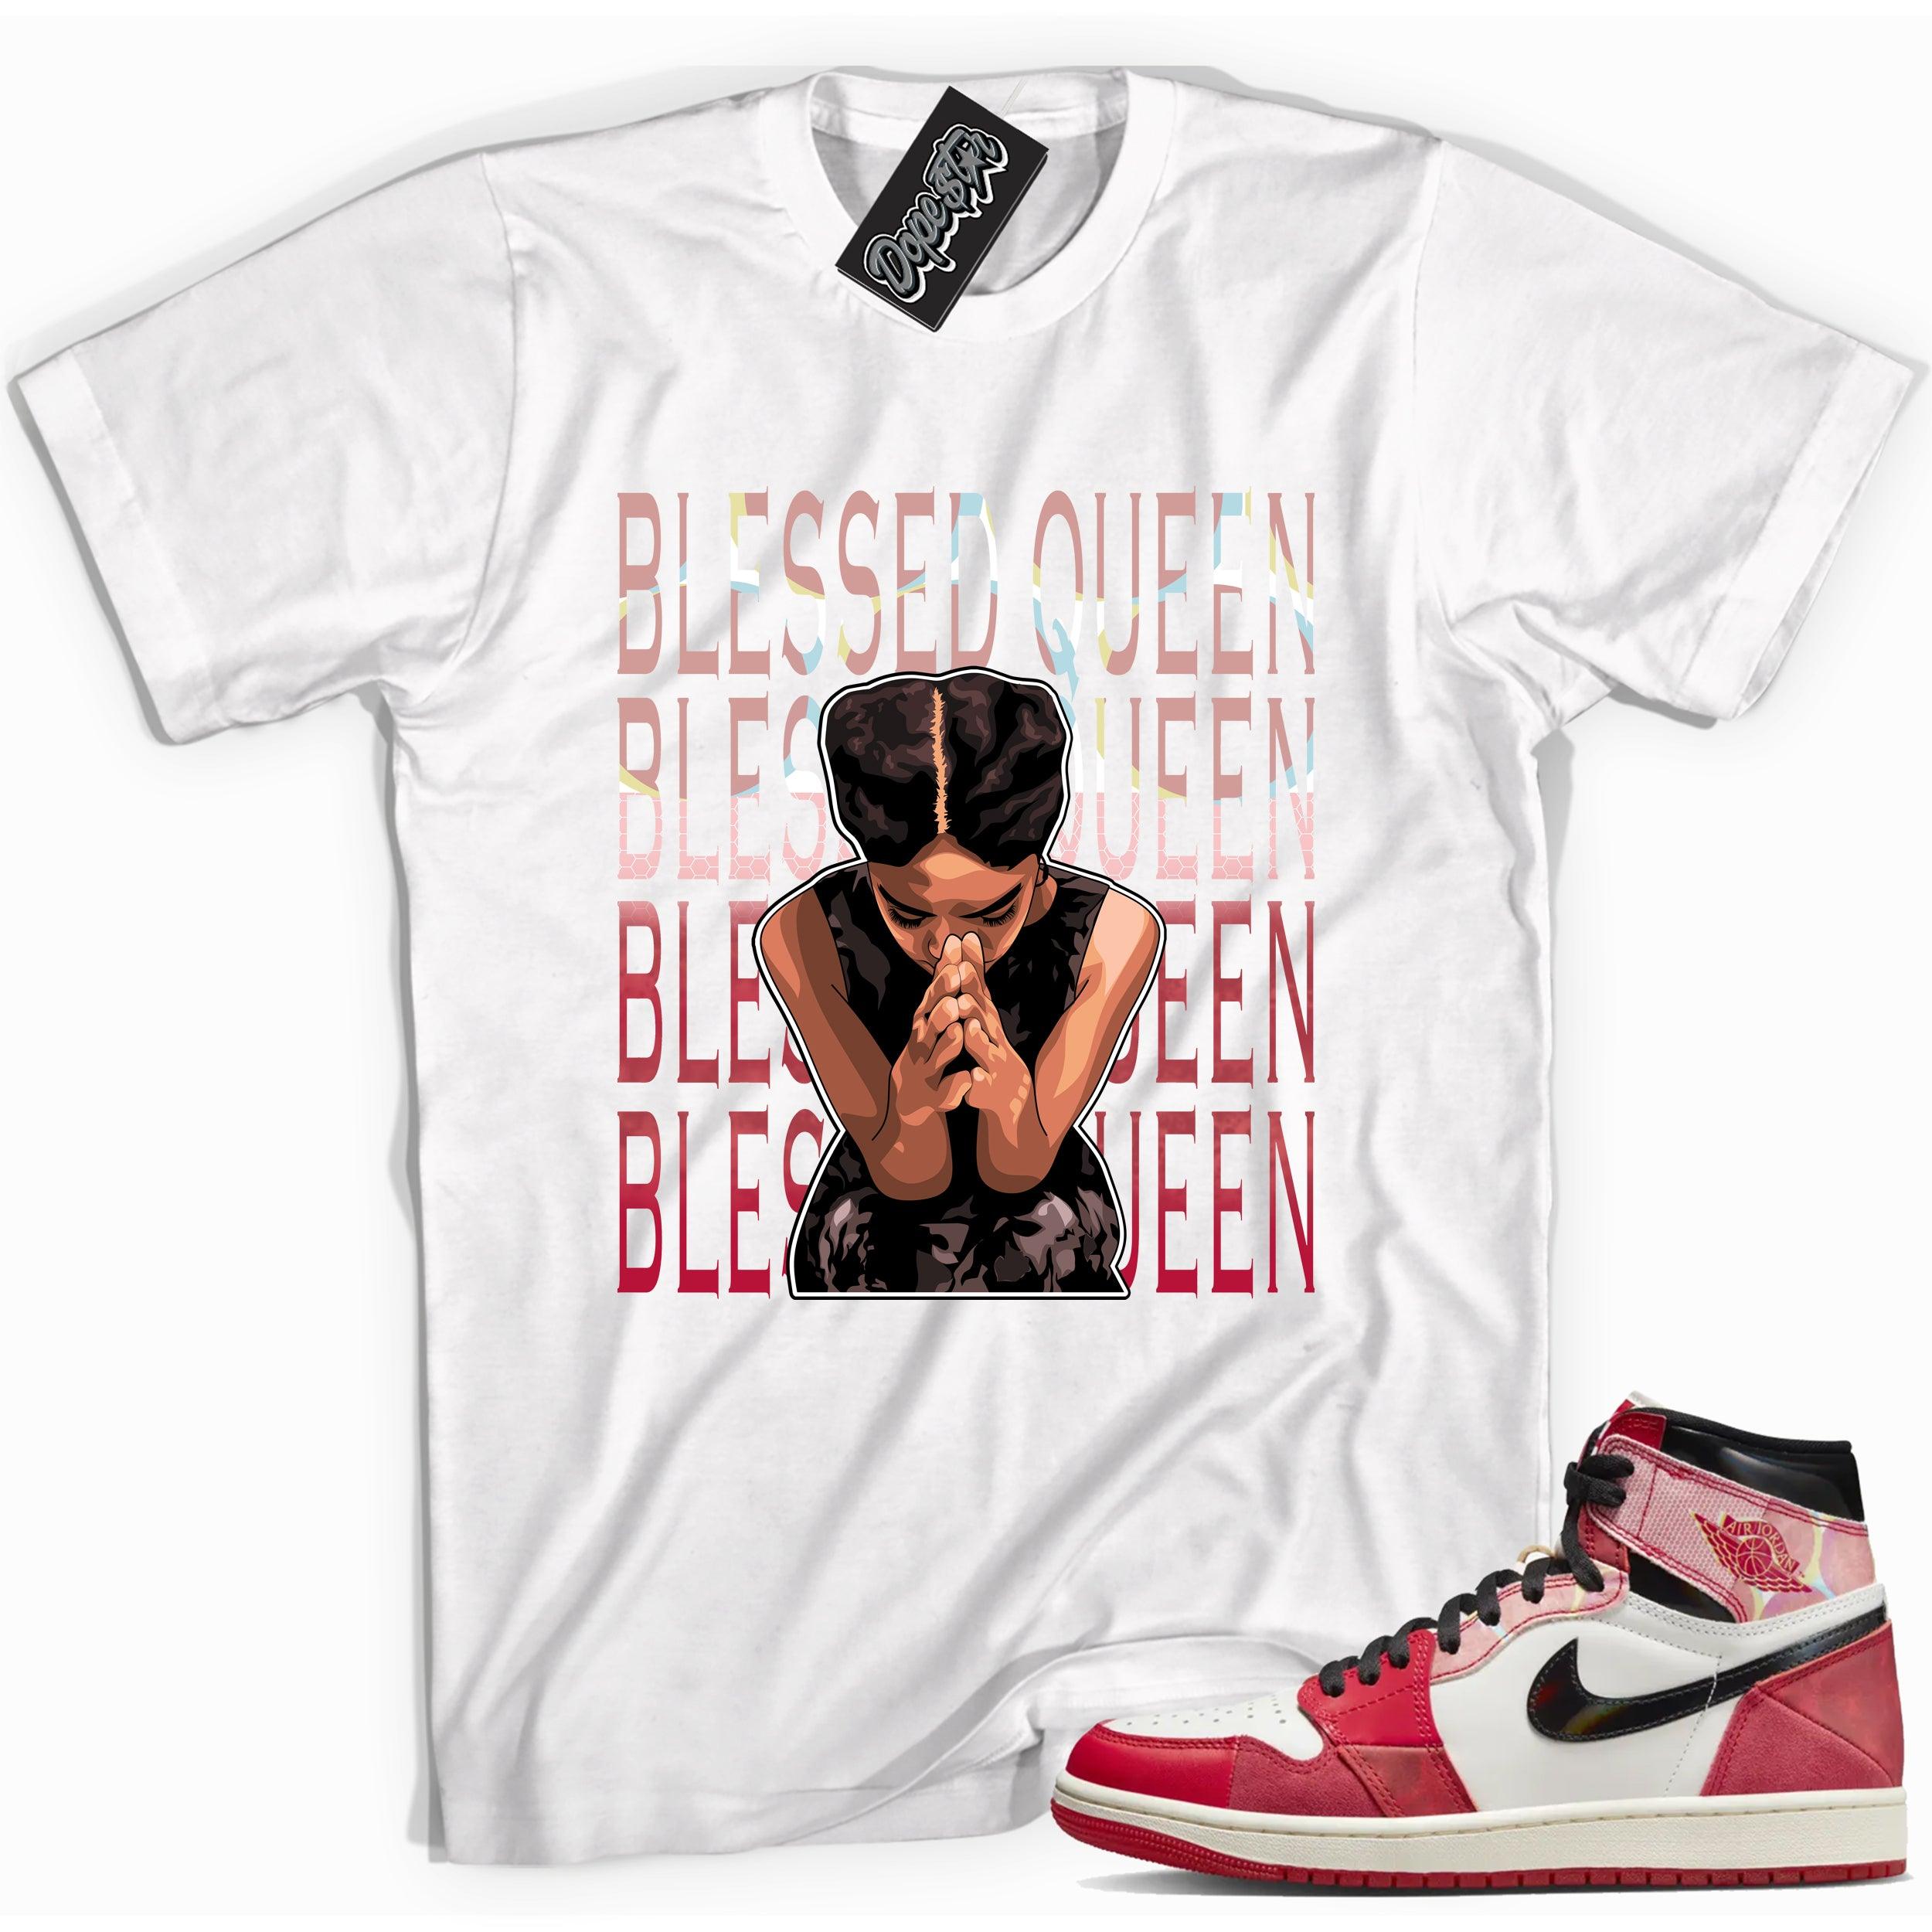 Cool White graphic tee with “ Blessed Queen ” print, that perfectly matches AIR JORDAN 1 Retro High OG NEXT CHAPTER SPIDER-VERSE sneakers 